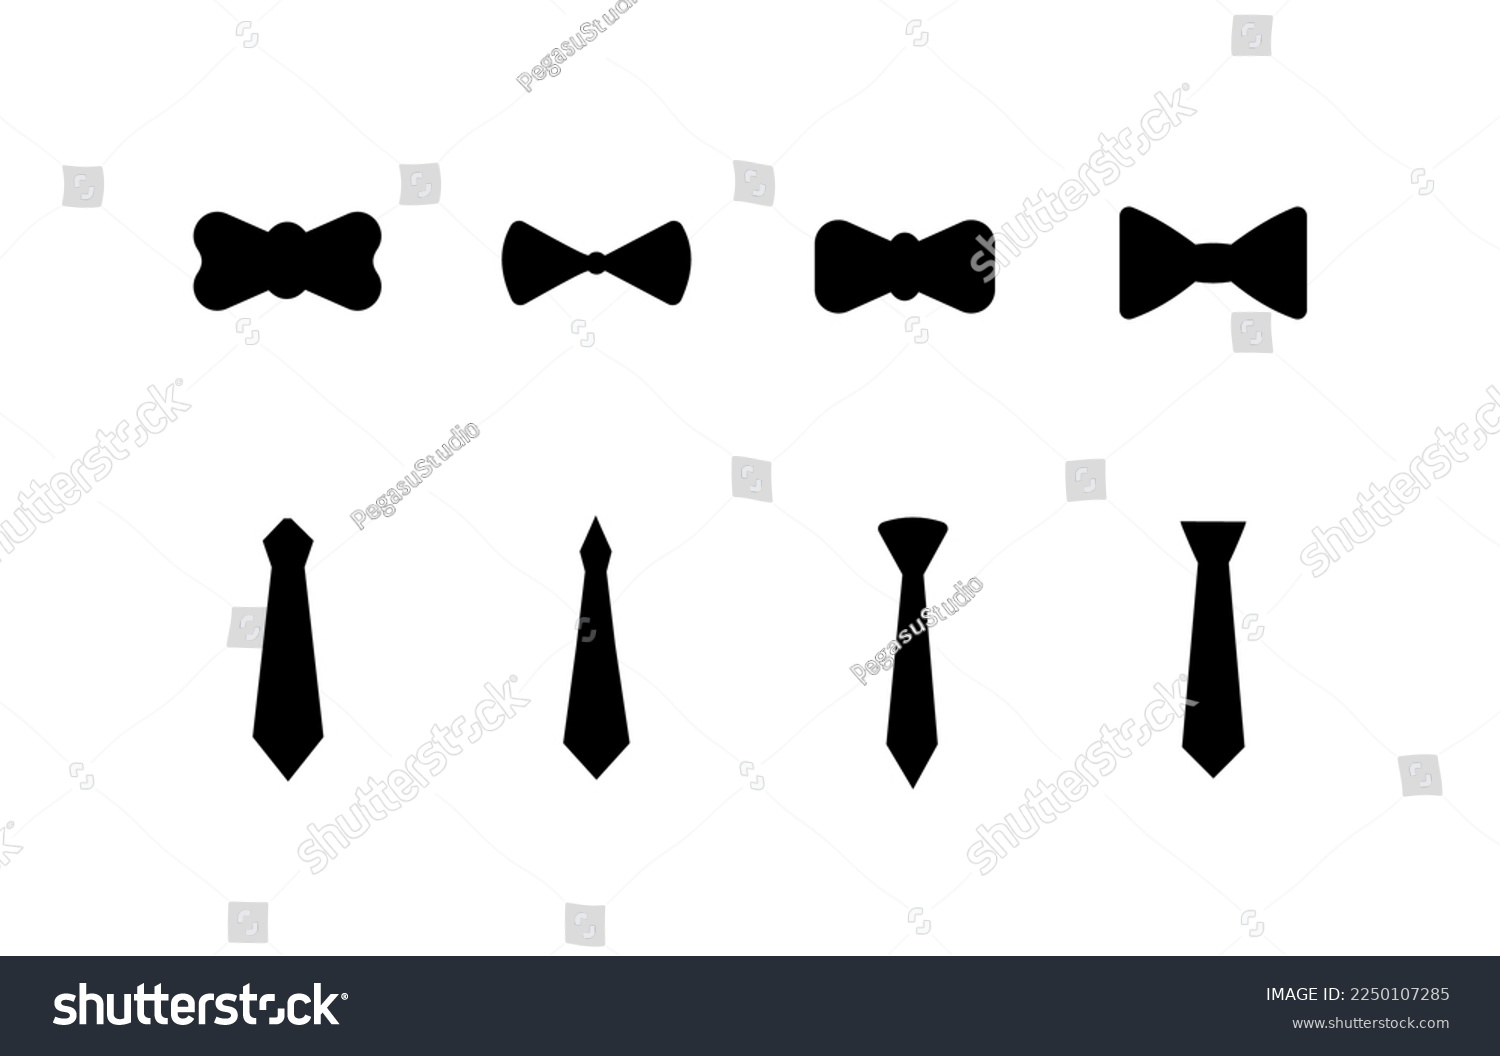 SVG of Wedding tuxedo Bow tie, suit vector Illustration isolated on white background.Tuxedo shirt design. Gentleman svg Clipart Decor Cut Files for Cricut and Silhouette svg